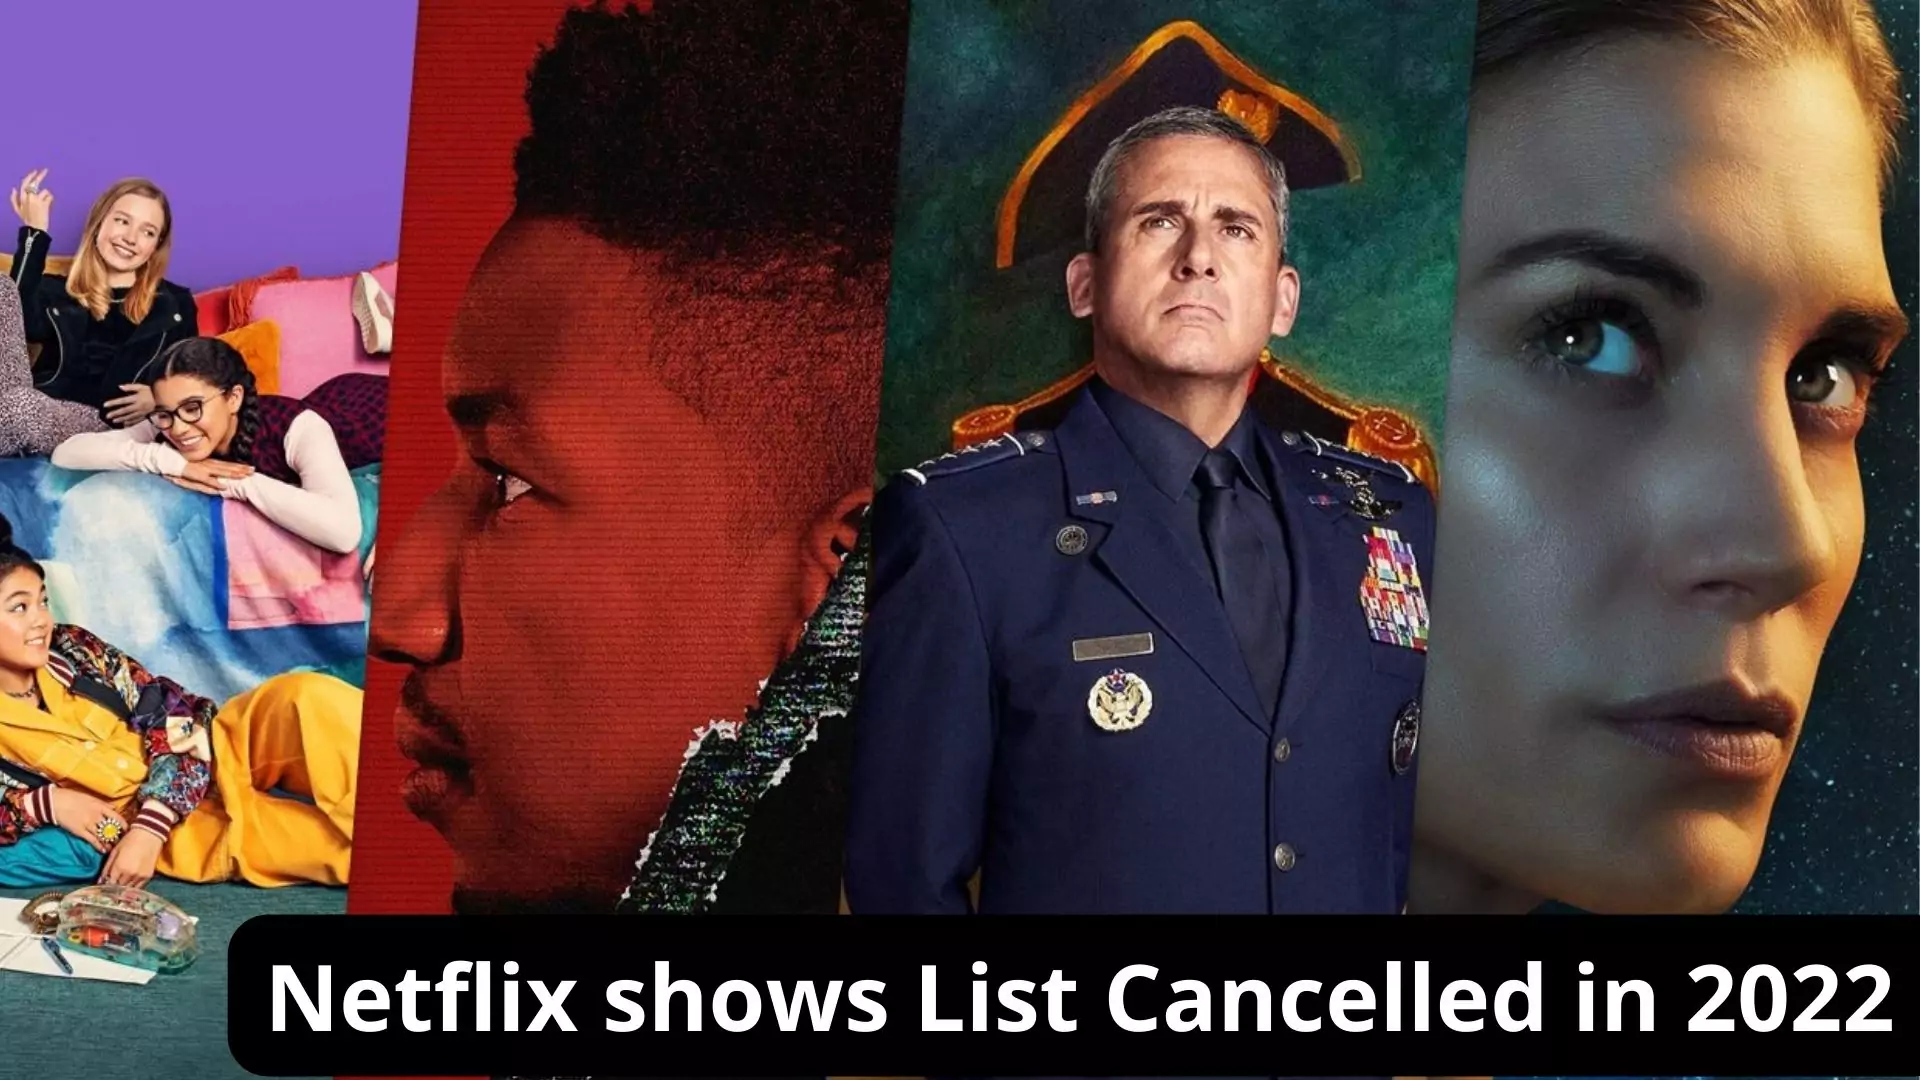 Netflix shows List Cancelled in 2022